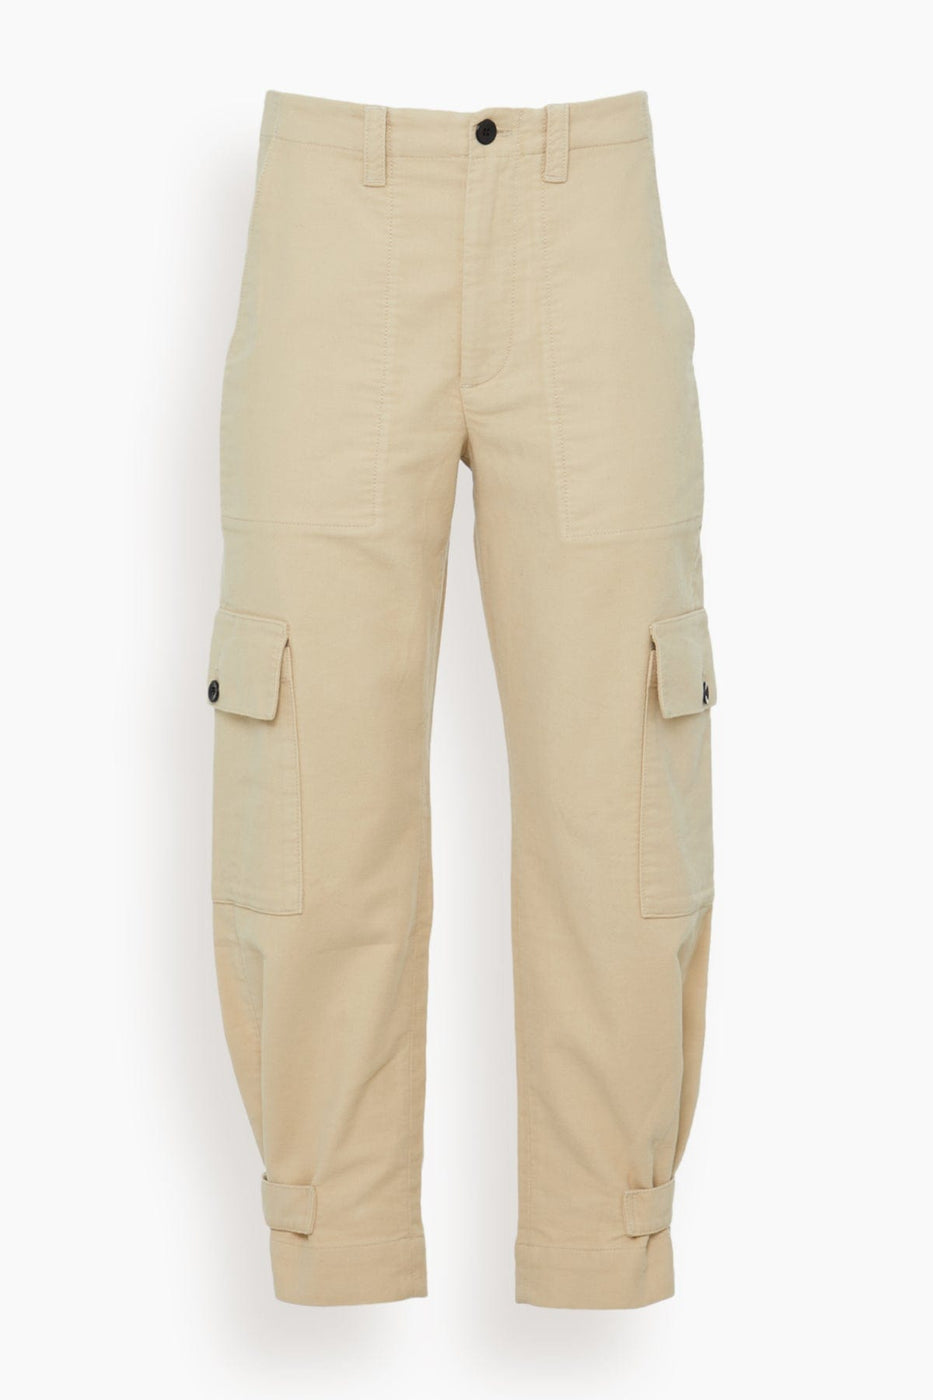 Proenza Schouler White Label Pants Kay Cargo Pant in Canvas